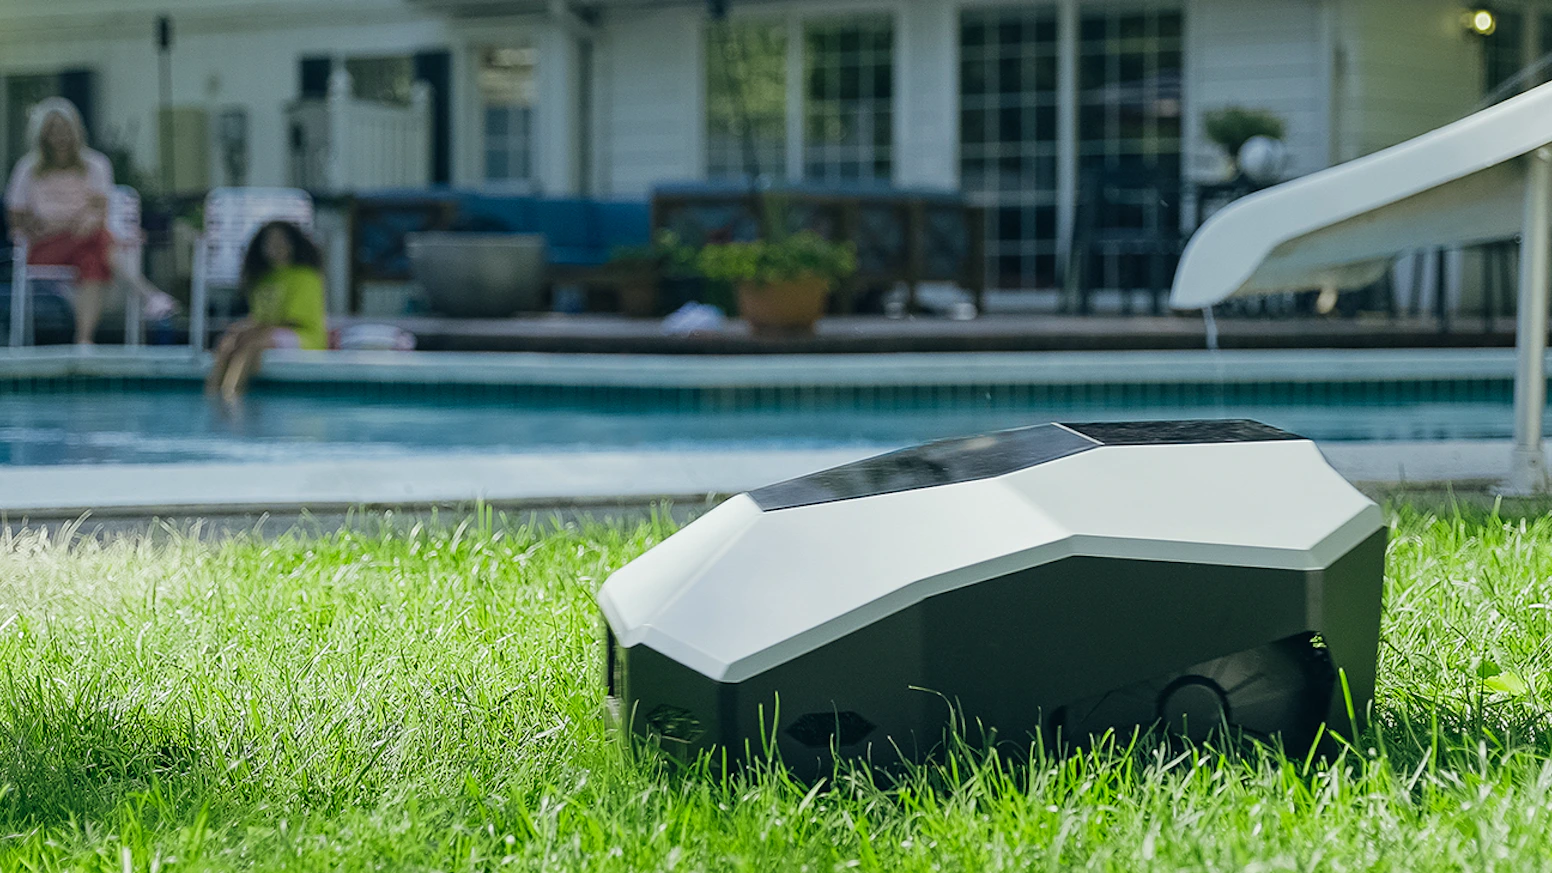 Is the Lawna mower smart or a scam?